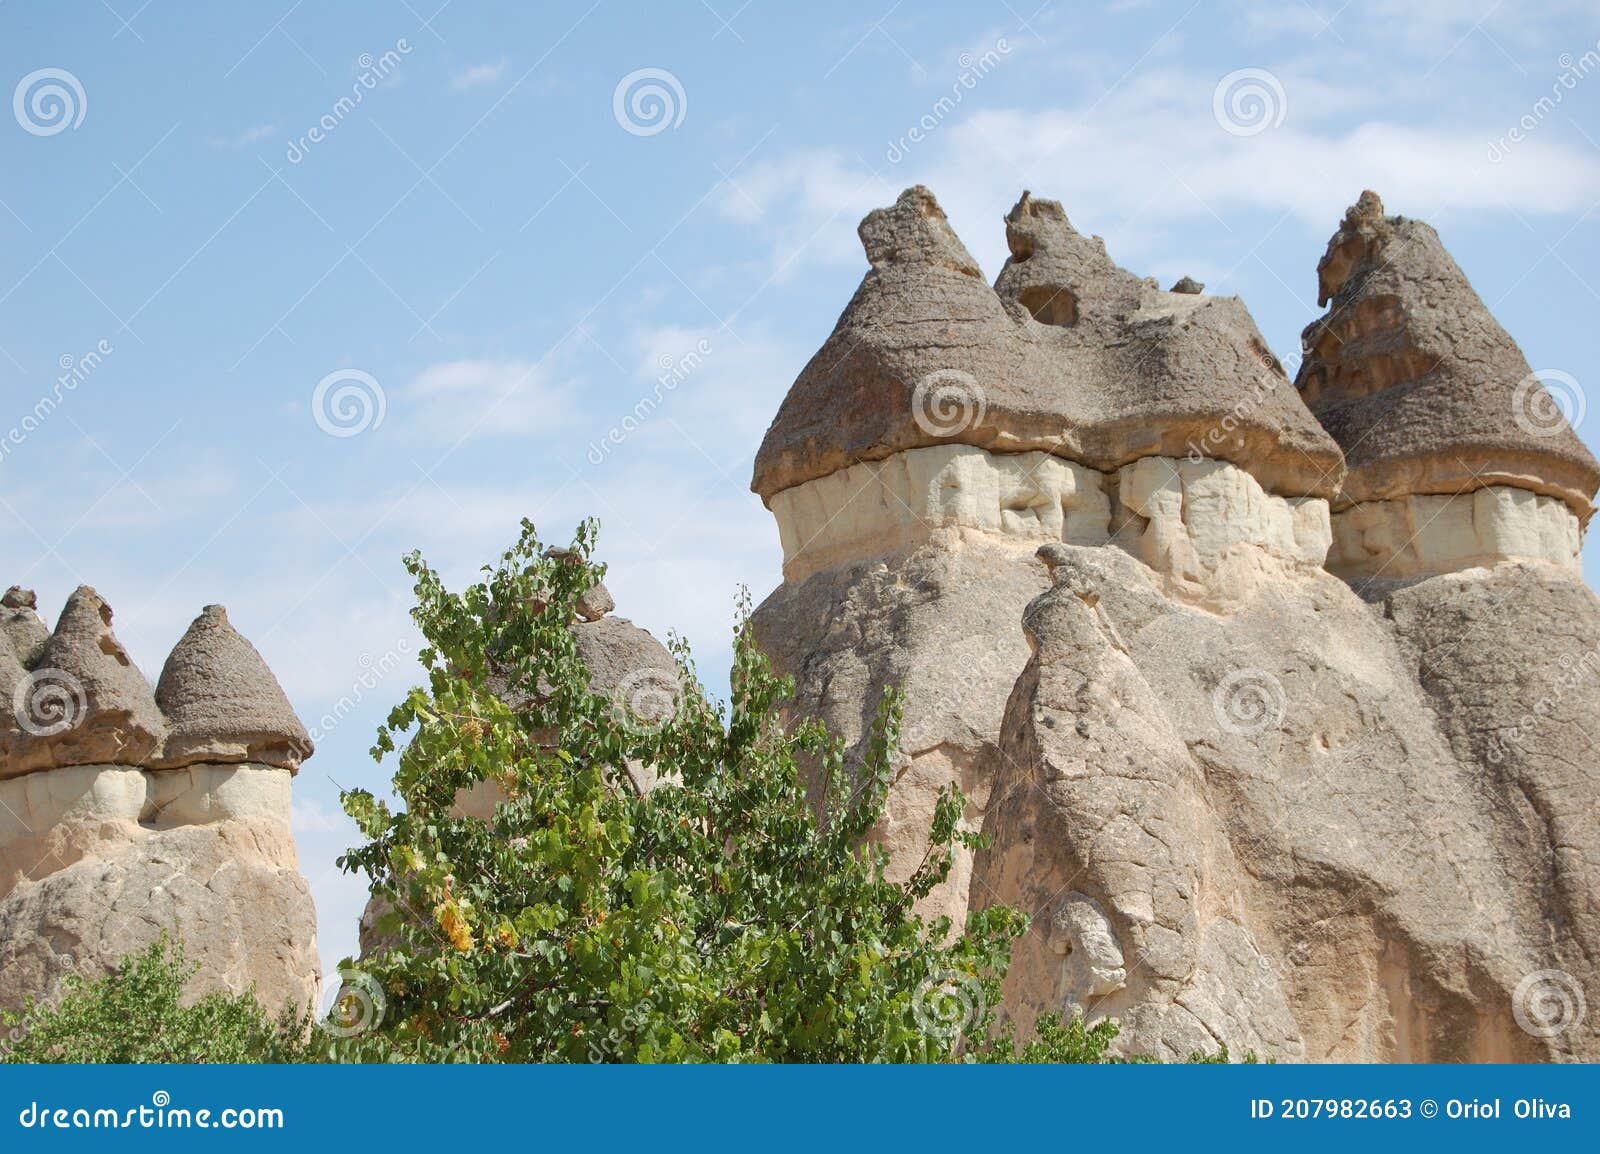 goreme valley (cappadocia turkey). ancient byzantine christian churches hewn out of the rock. fairy chimneys